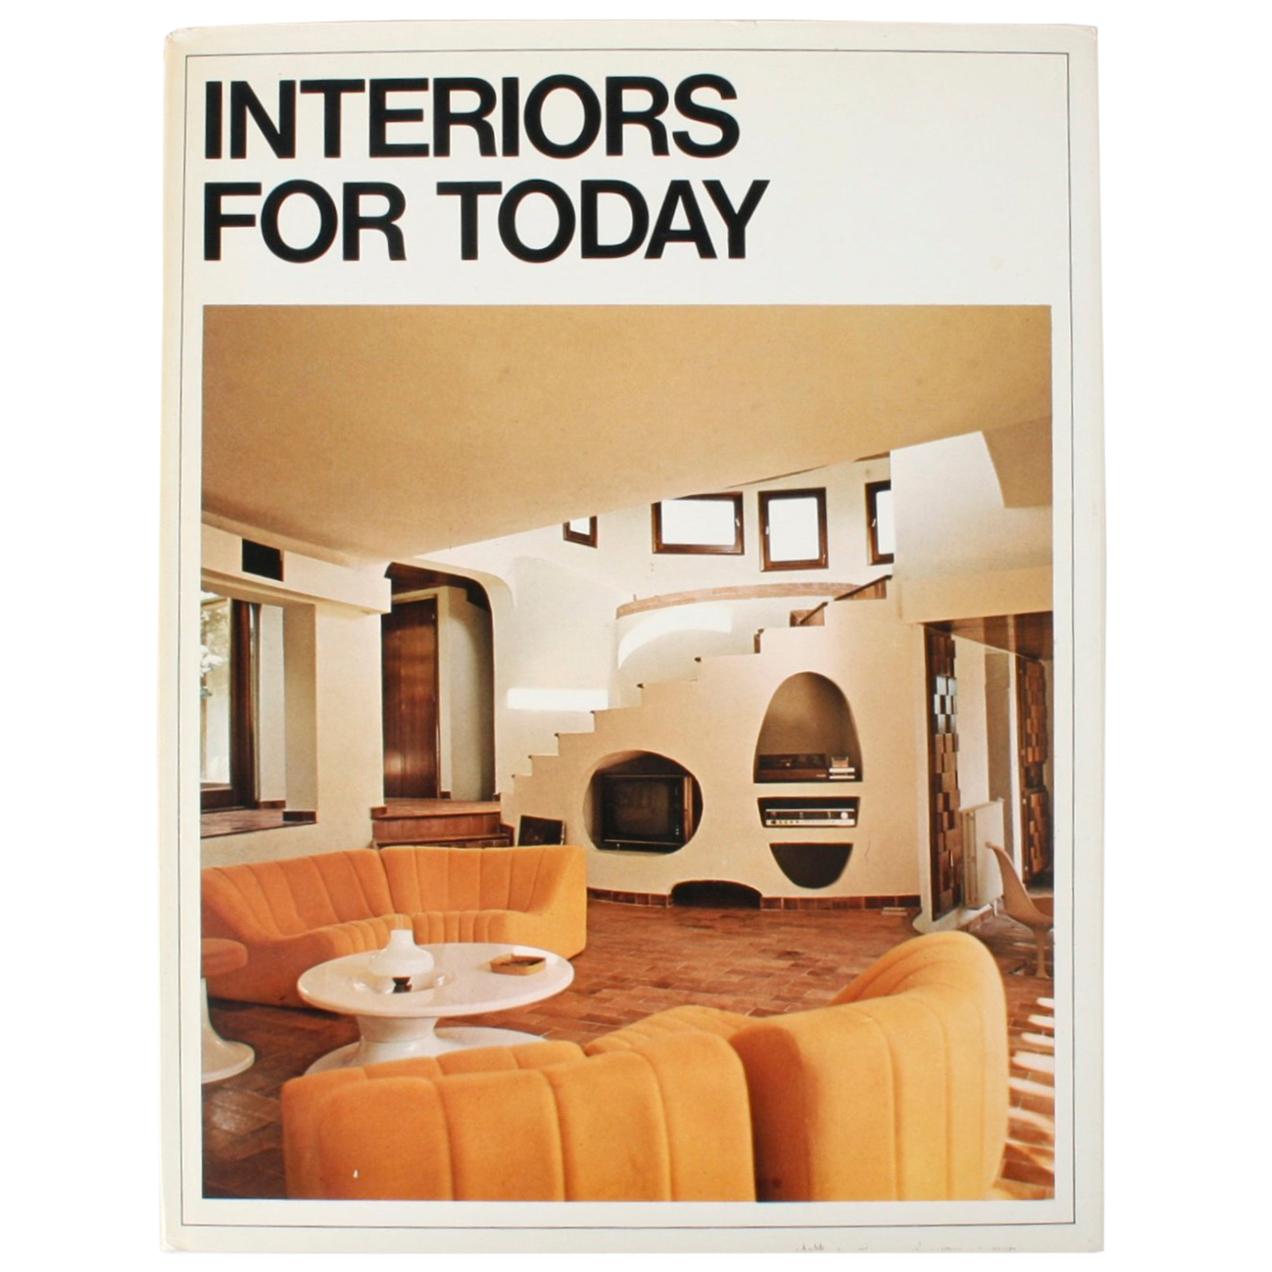 Interiors for Today, First Edition